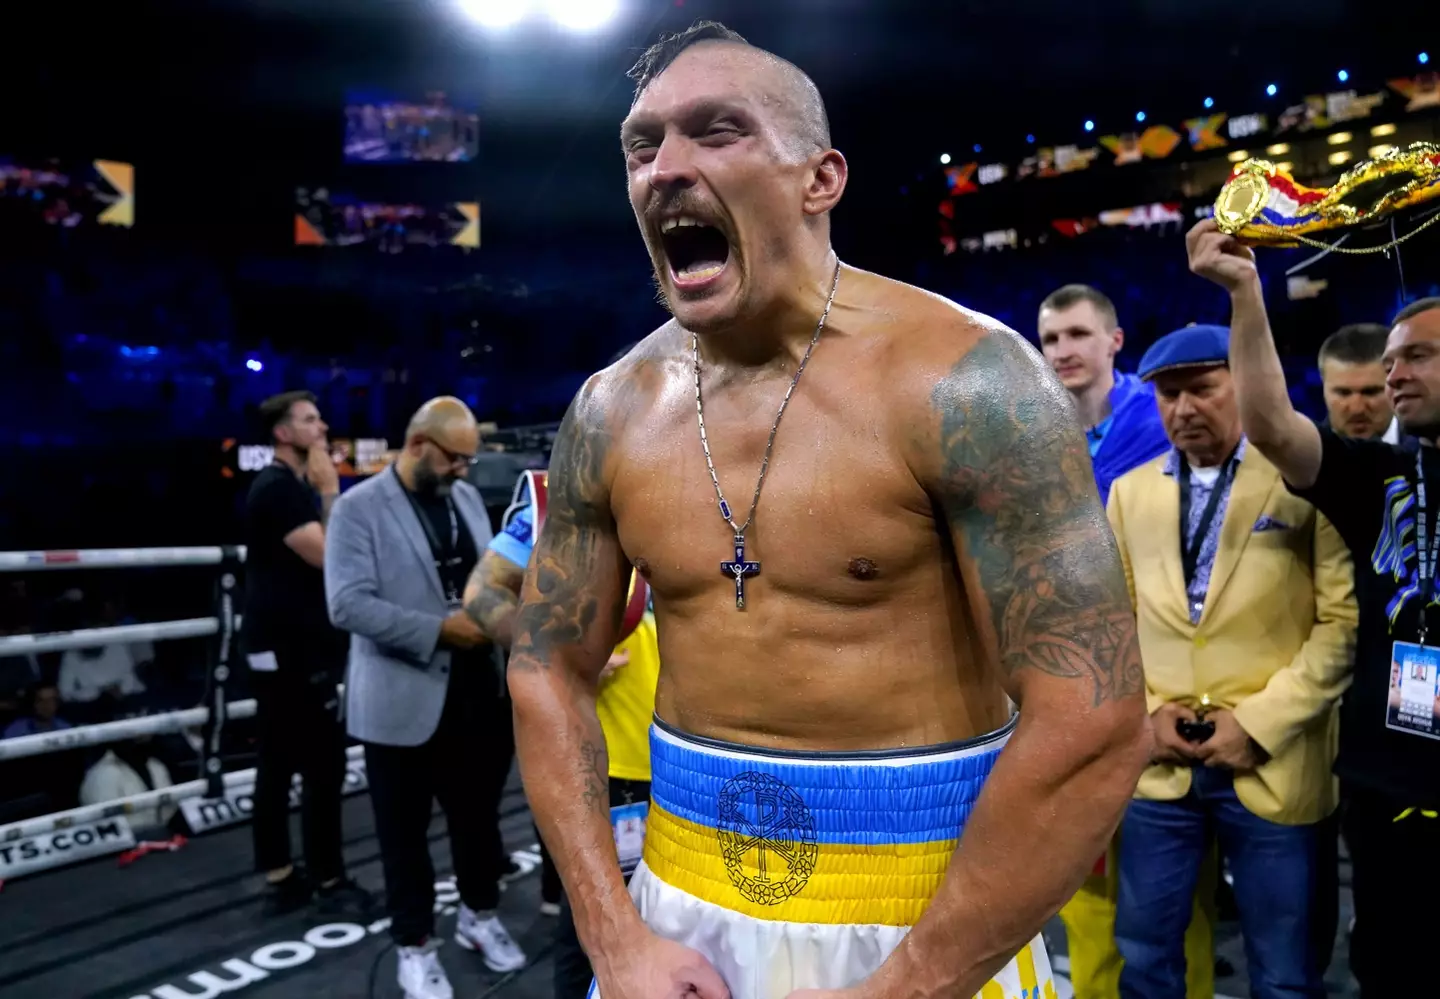 Usyk's reps say he will look for a mandatory challenger now.